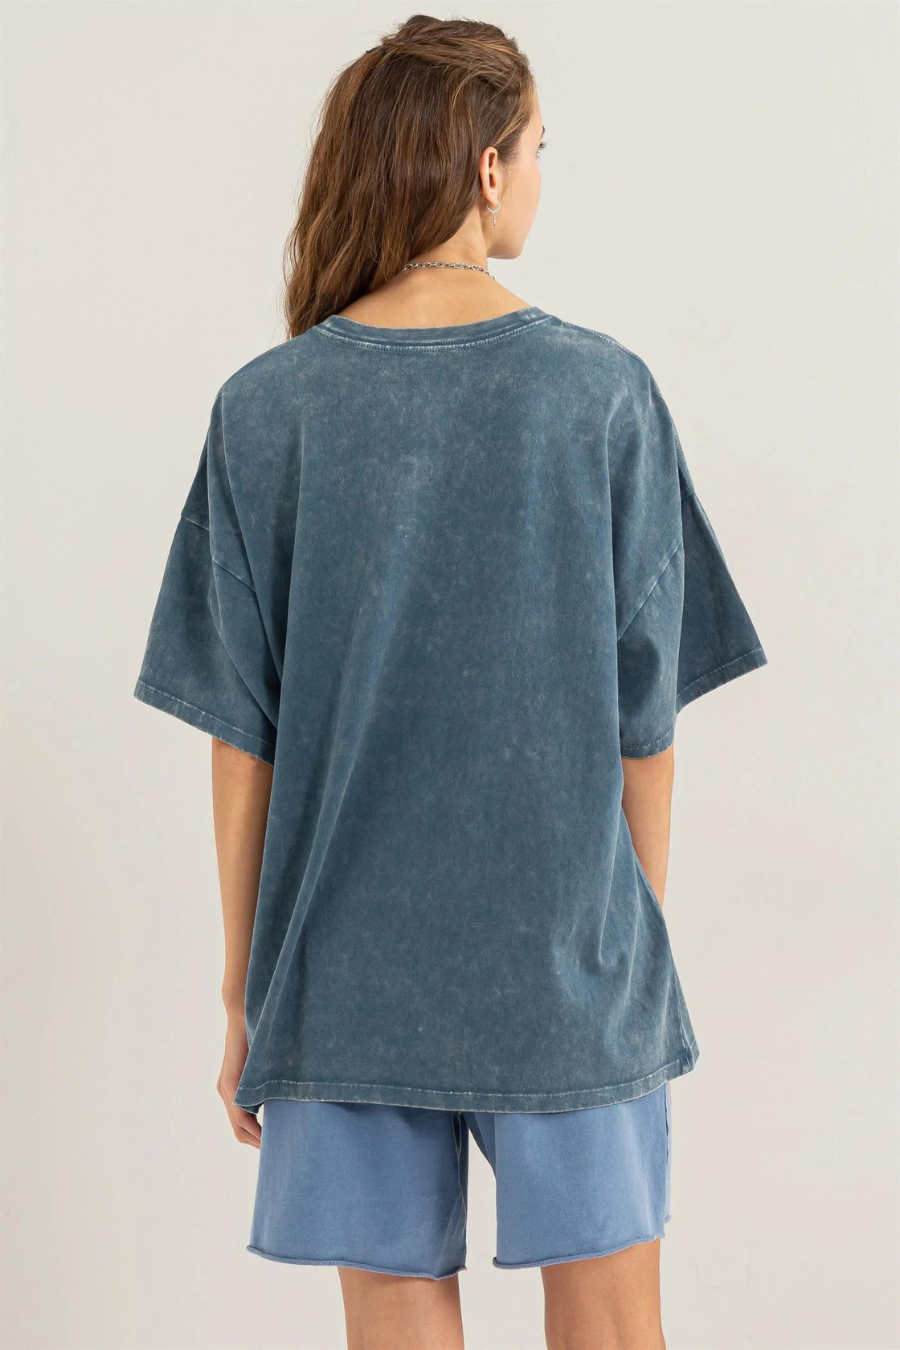 back view of girl wearing Maisie over sized t shirt in teal 